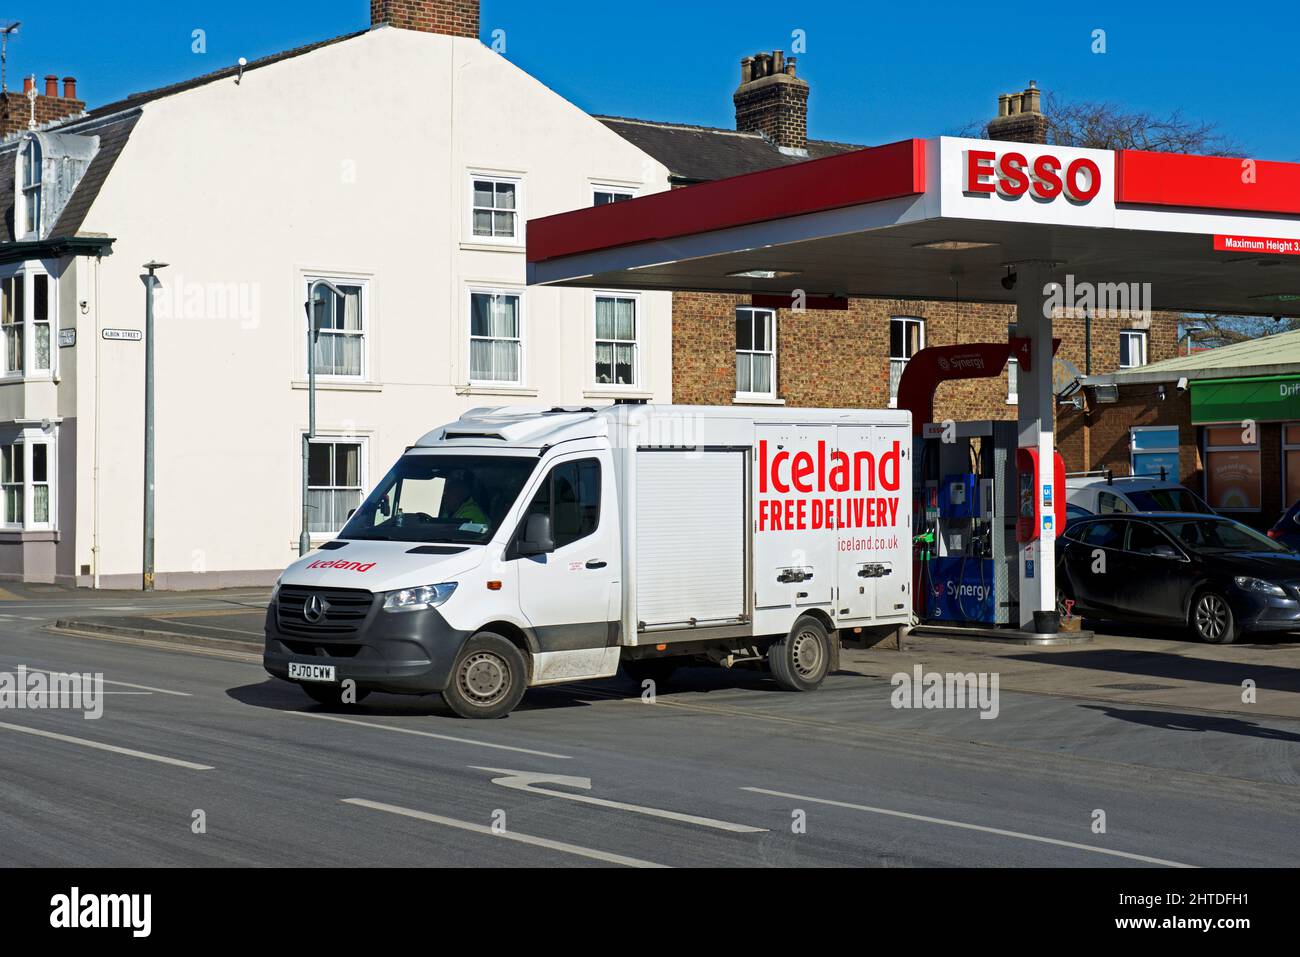 Iceland delivery van leaving Esso petrol station in Driffield, East Yorkshire, England UK Stock Photo